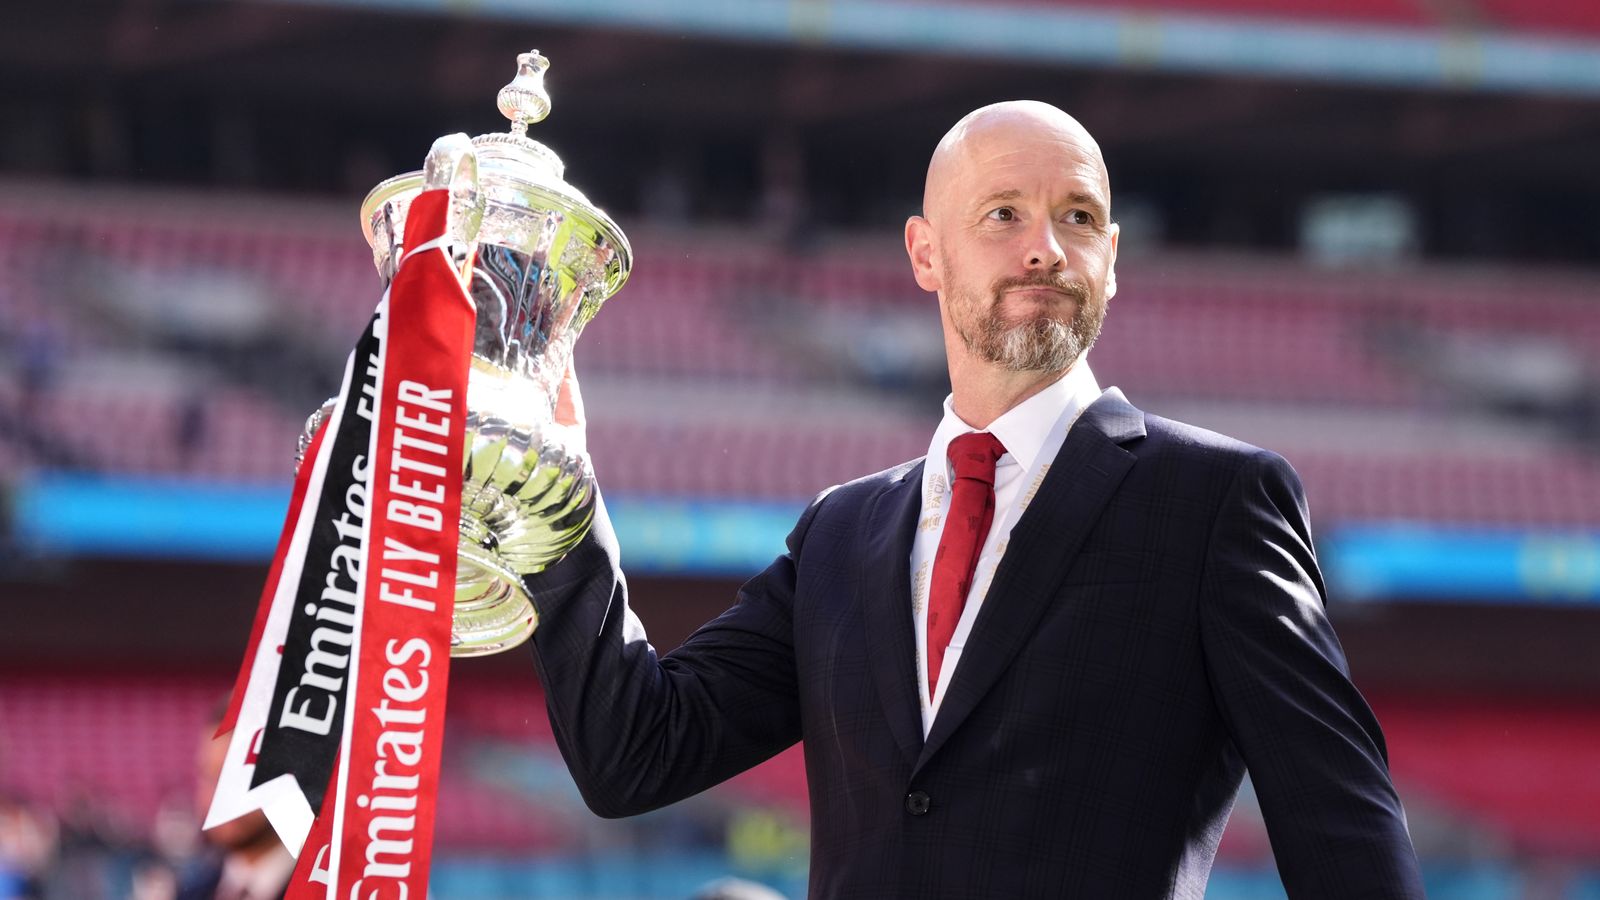 Erik ten Hag to stay as Manchester United manager and is in talks to extend contract | Football News